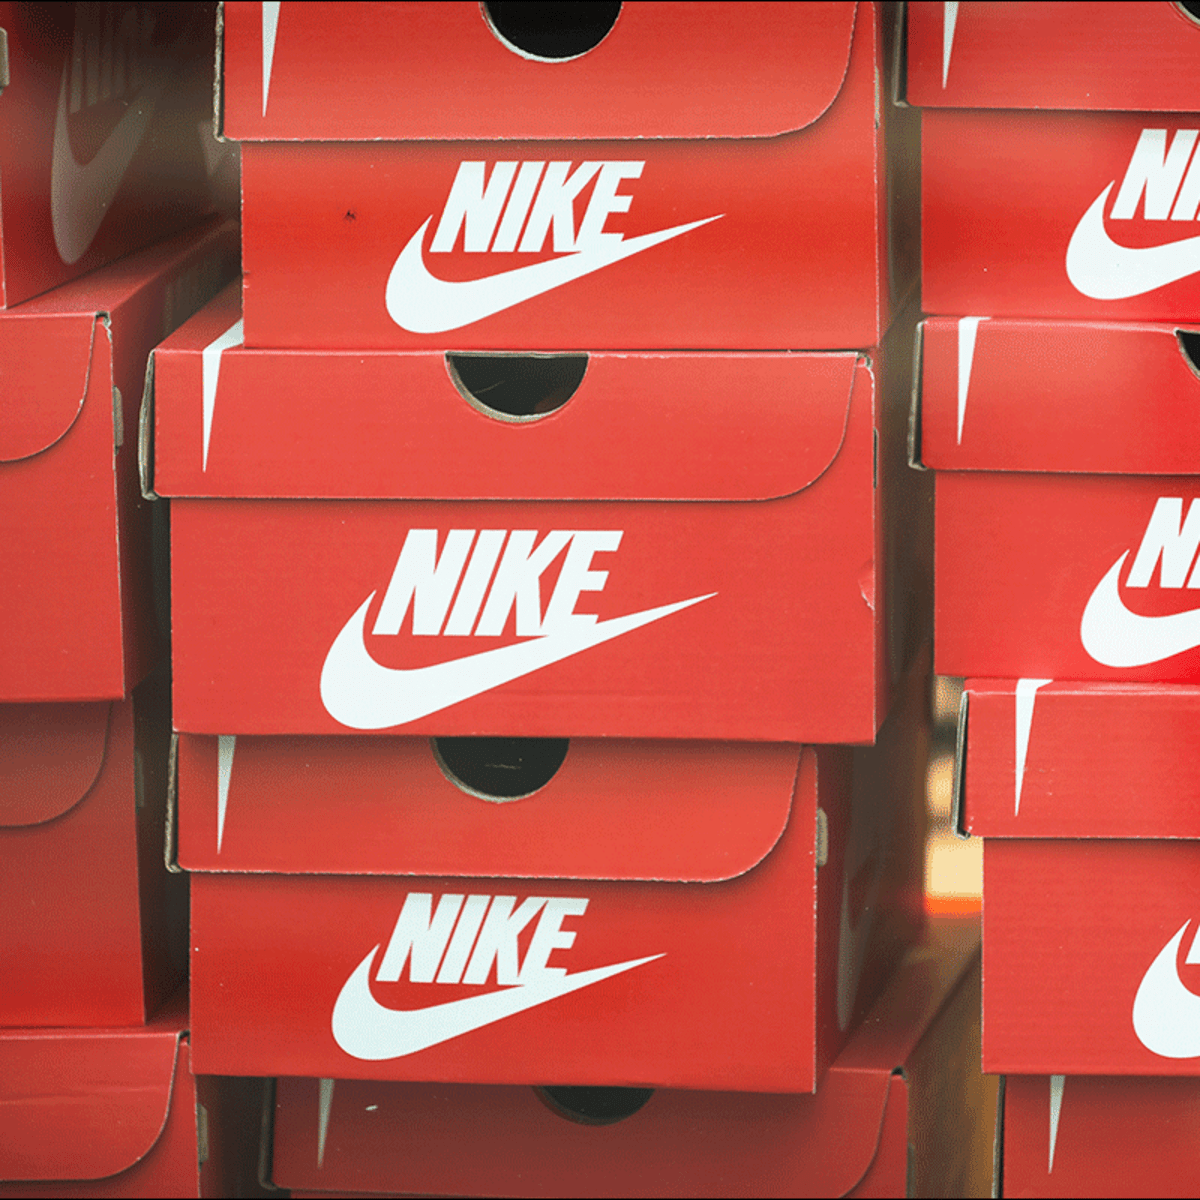 Nike Bounce BAML Upgrade, Price Target Increase Brand Potential - TheStreet